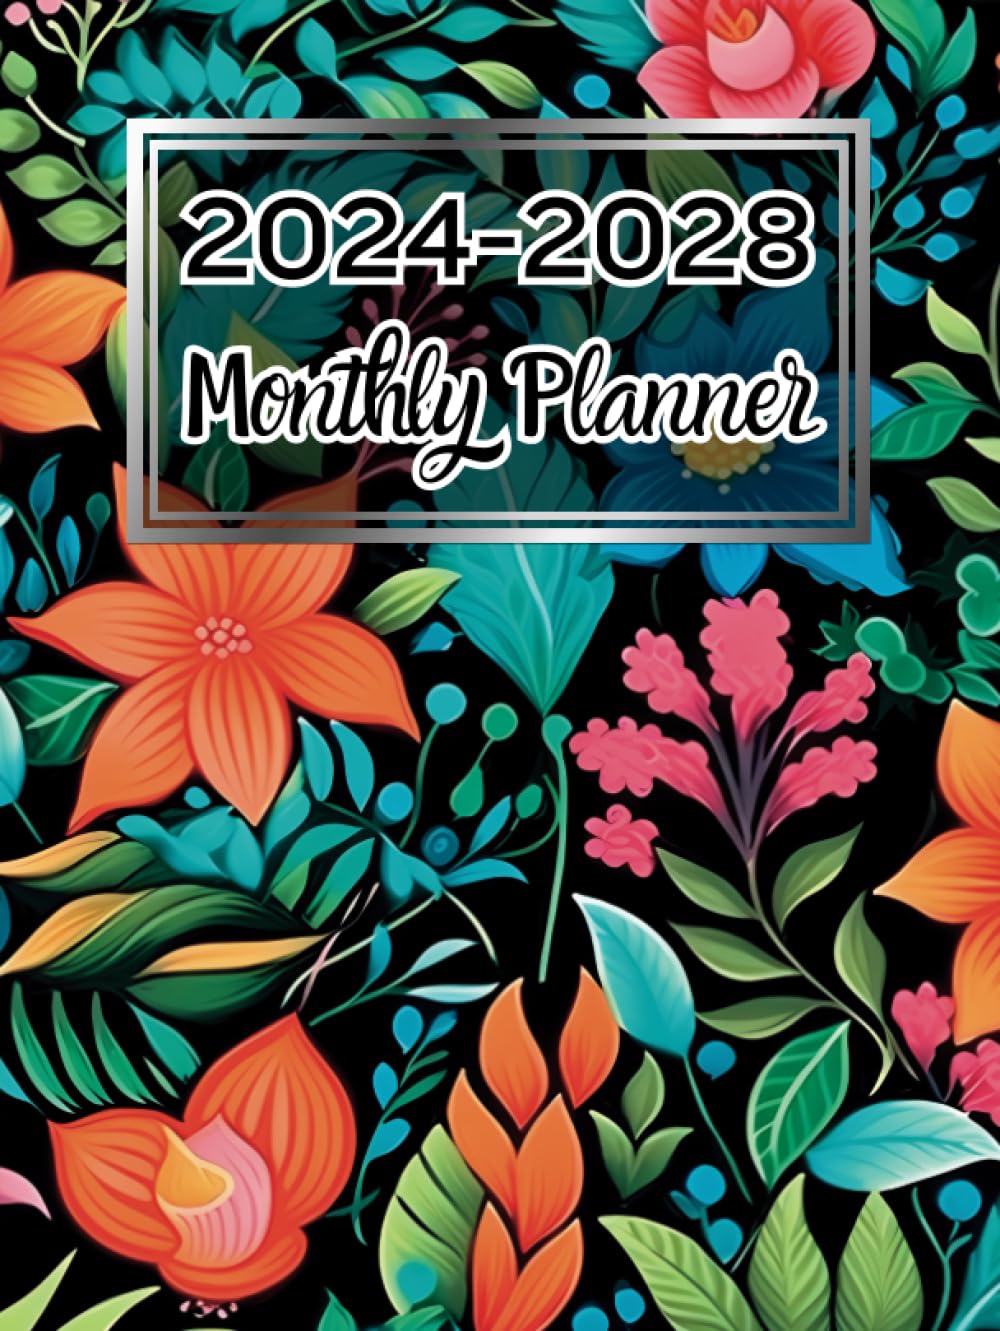 2024-2028 Monthly Planner: 5 Year Agenda from January 2024 to December 2028 with Yearly Overview and Federal Holidays | Monthly Goals, To Do List & ... Print Format| Pretty Black Floral Design